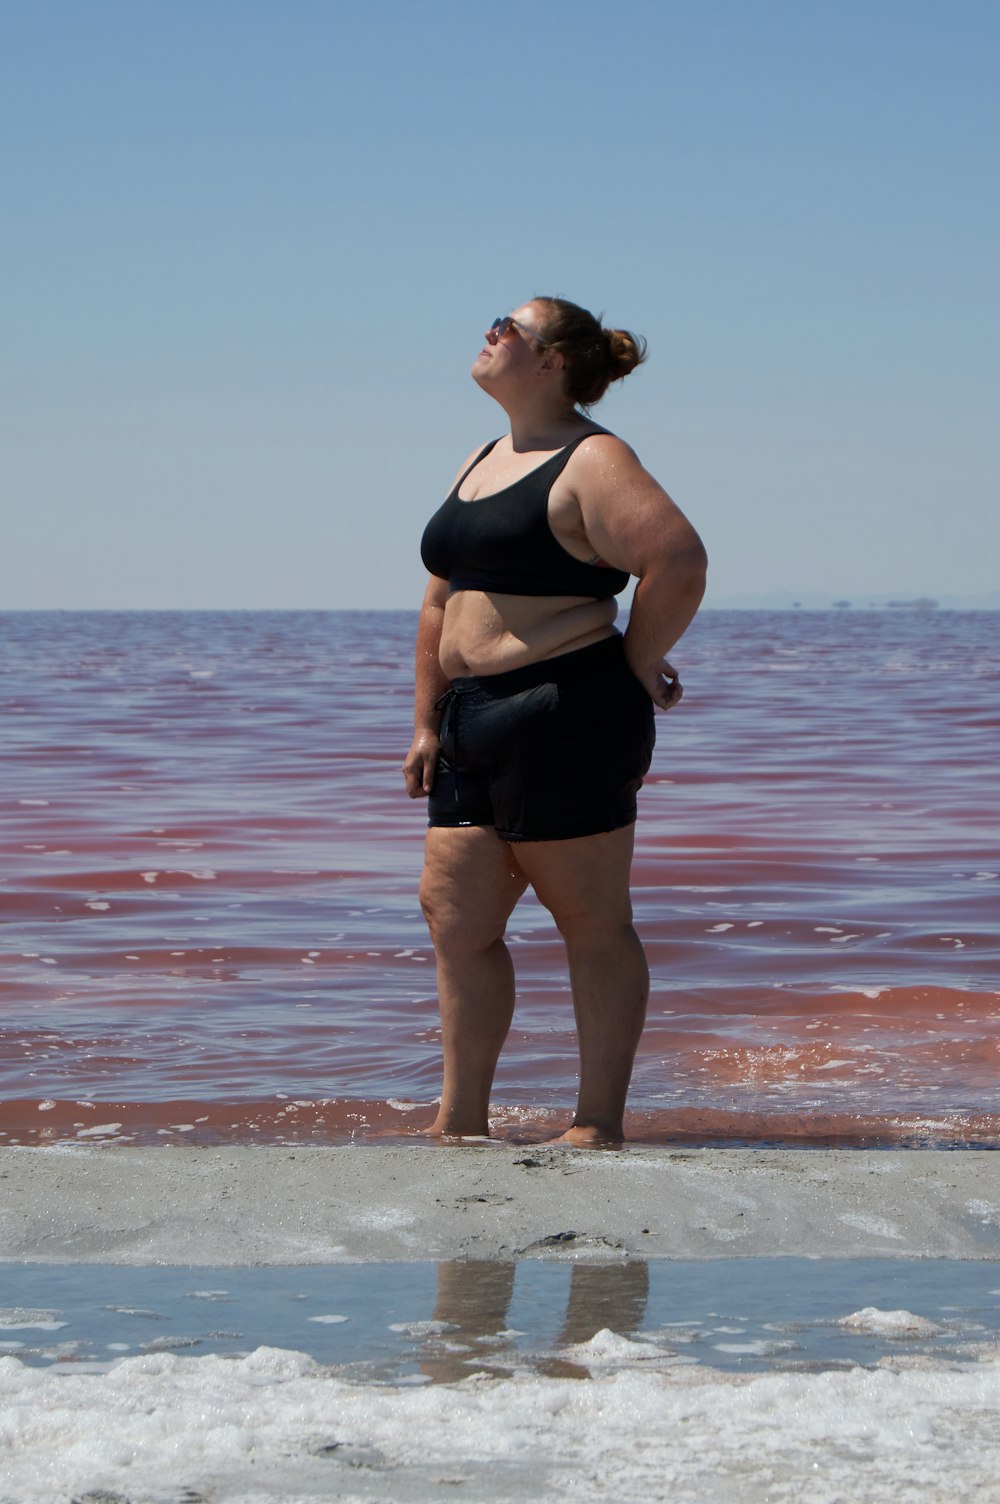 a person standing on a beach